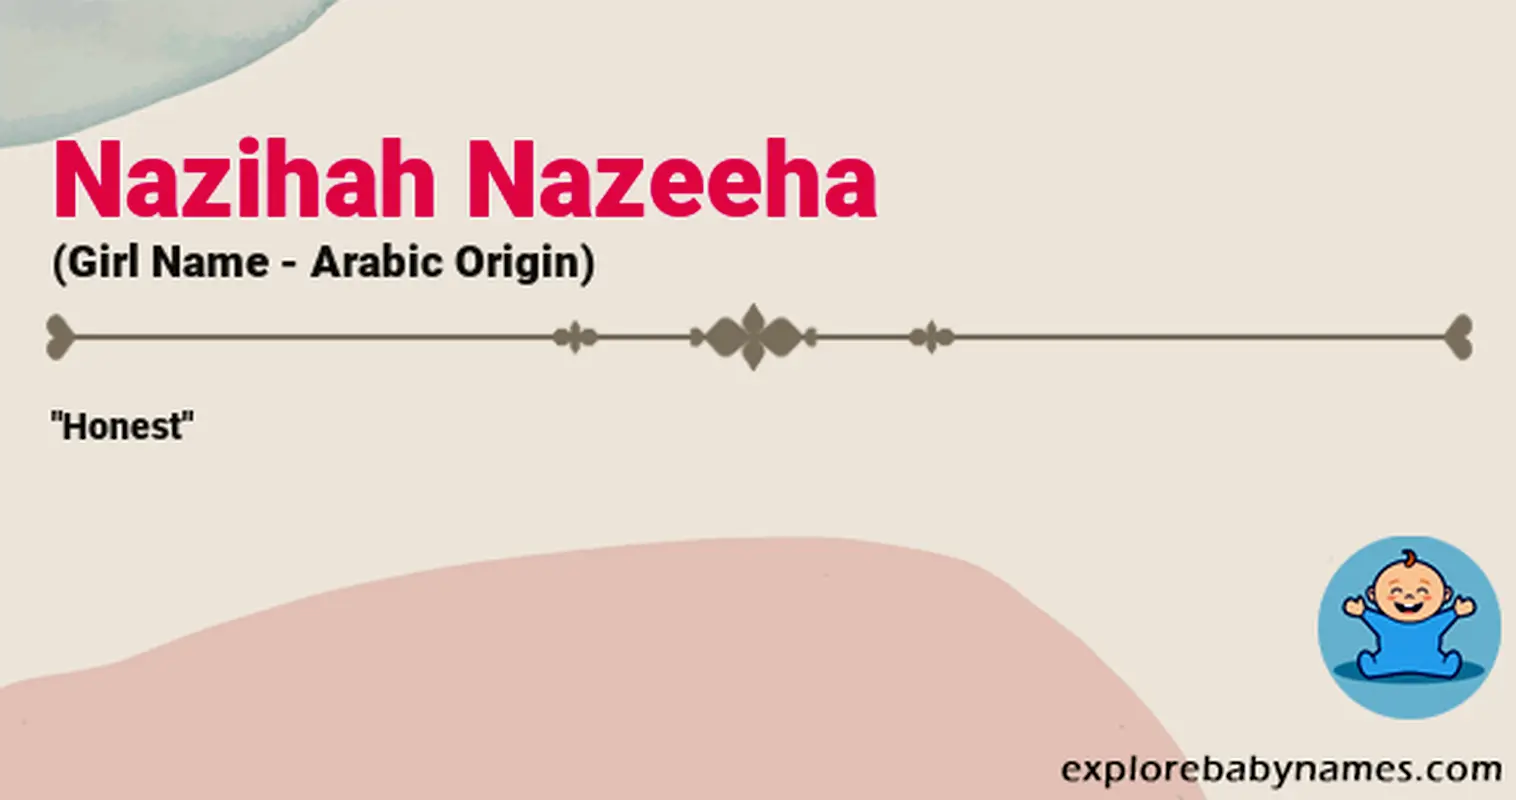 Meaning of Nazihah Nazeeha